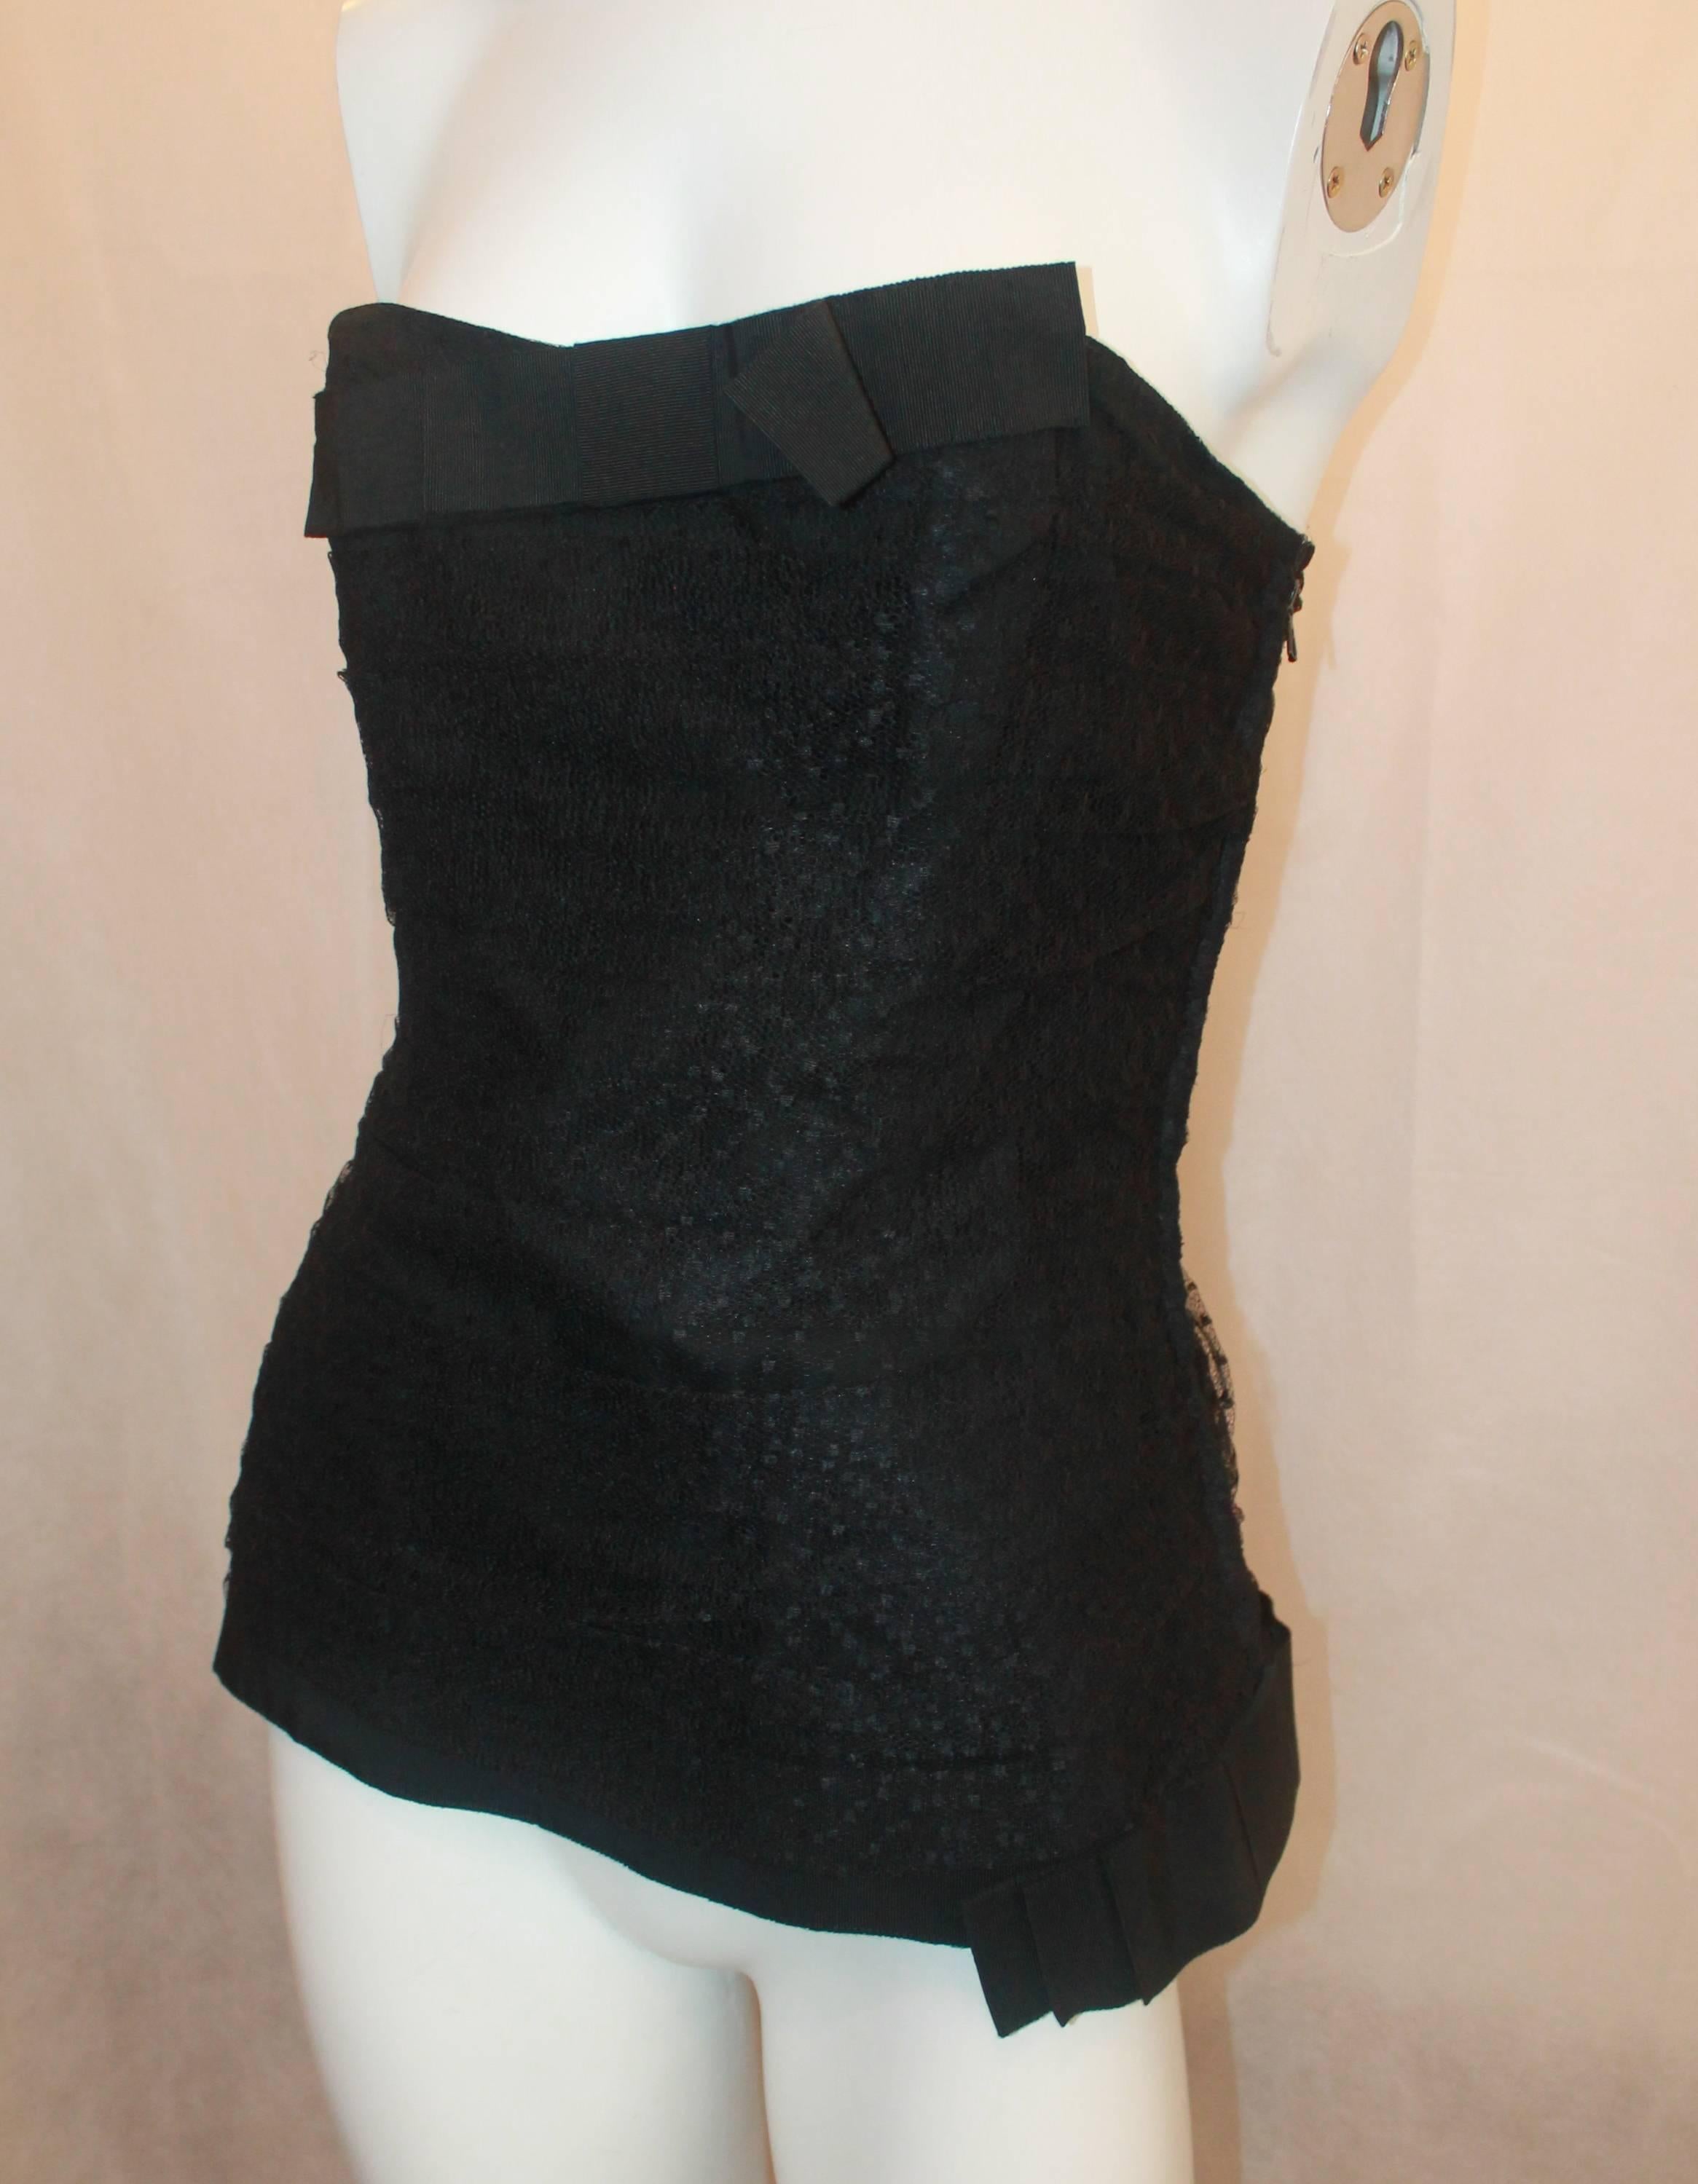 YSL Black Lace & Cotton Strapless Bustier Top w/ Grograin Trim - 44 - 60's-70's.  This sexy vintage top is in excellent vintage condition.  It features a bustier style, a beautiful black lace, a grograin ribbon trip, a bow on the top in the middle